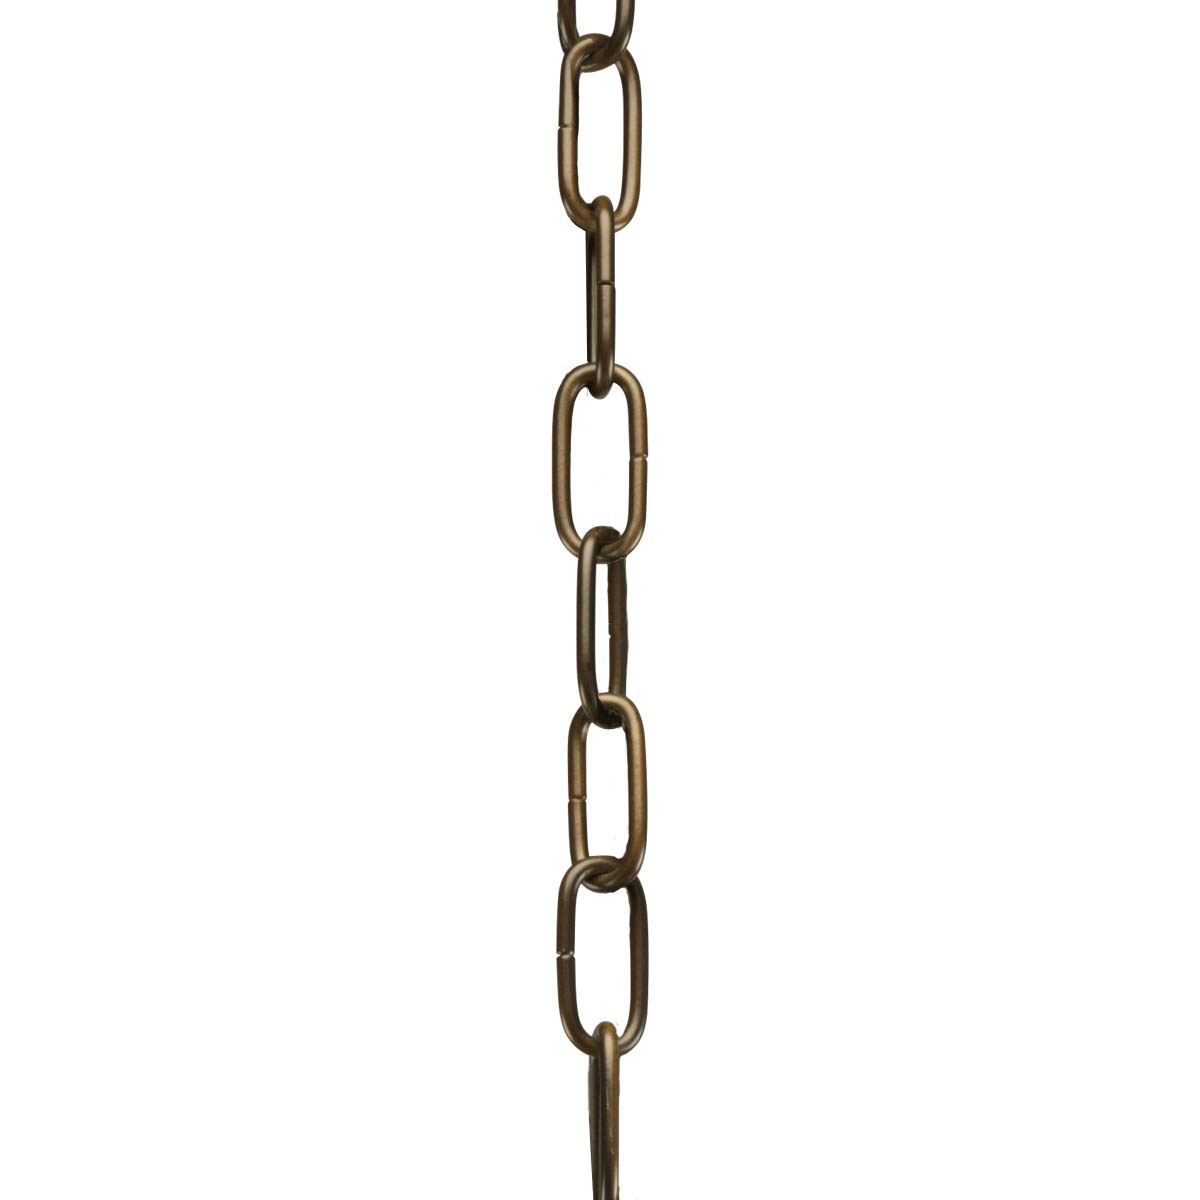 Ten feet of 9 gauge chain in Oil Rubbed Bronze finish. Solid chain permits installation of chain-hung fixtures on high ceilings. Maximum fixture weight 50 lbs.